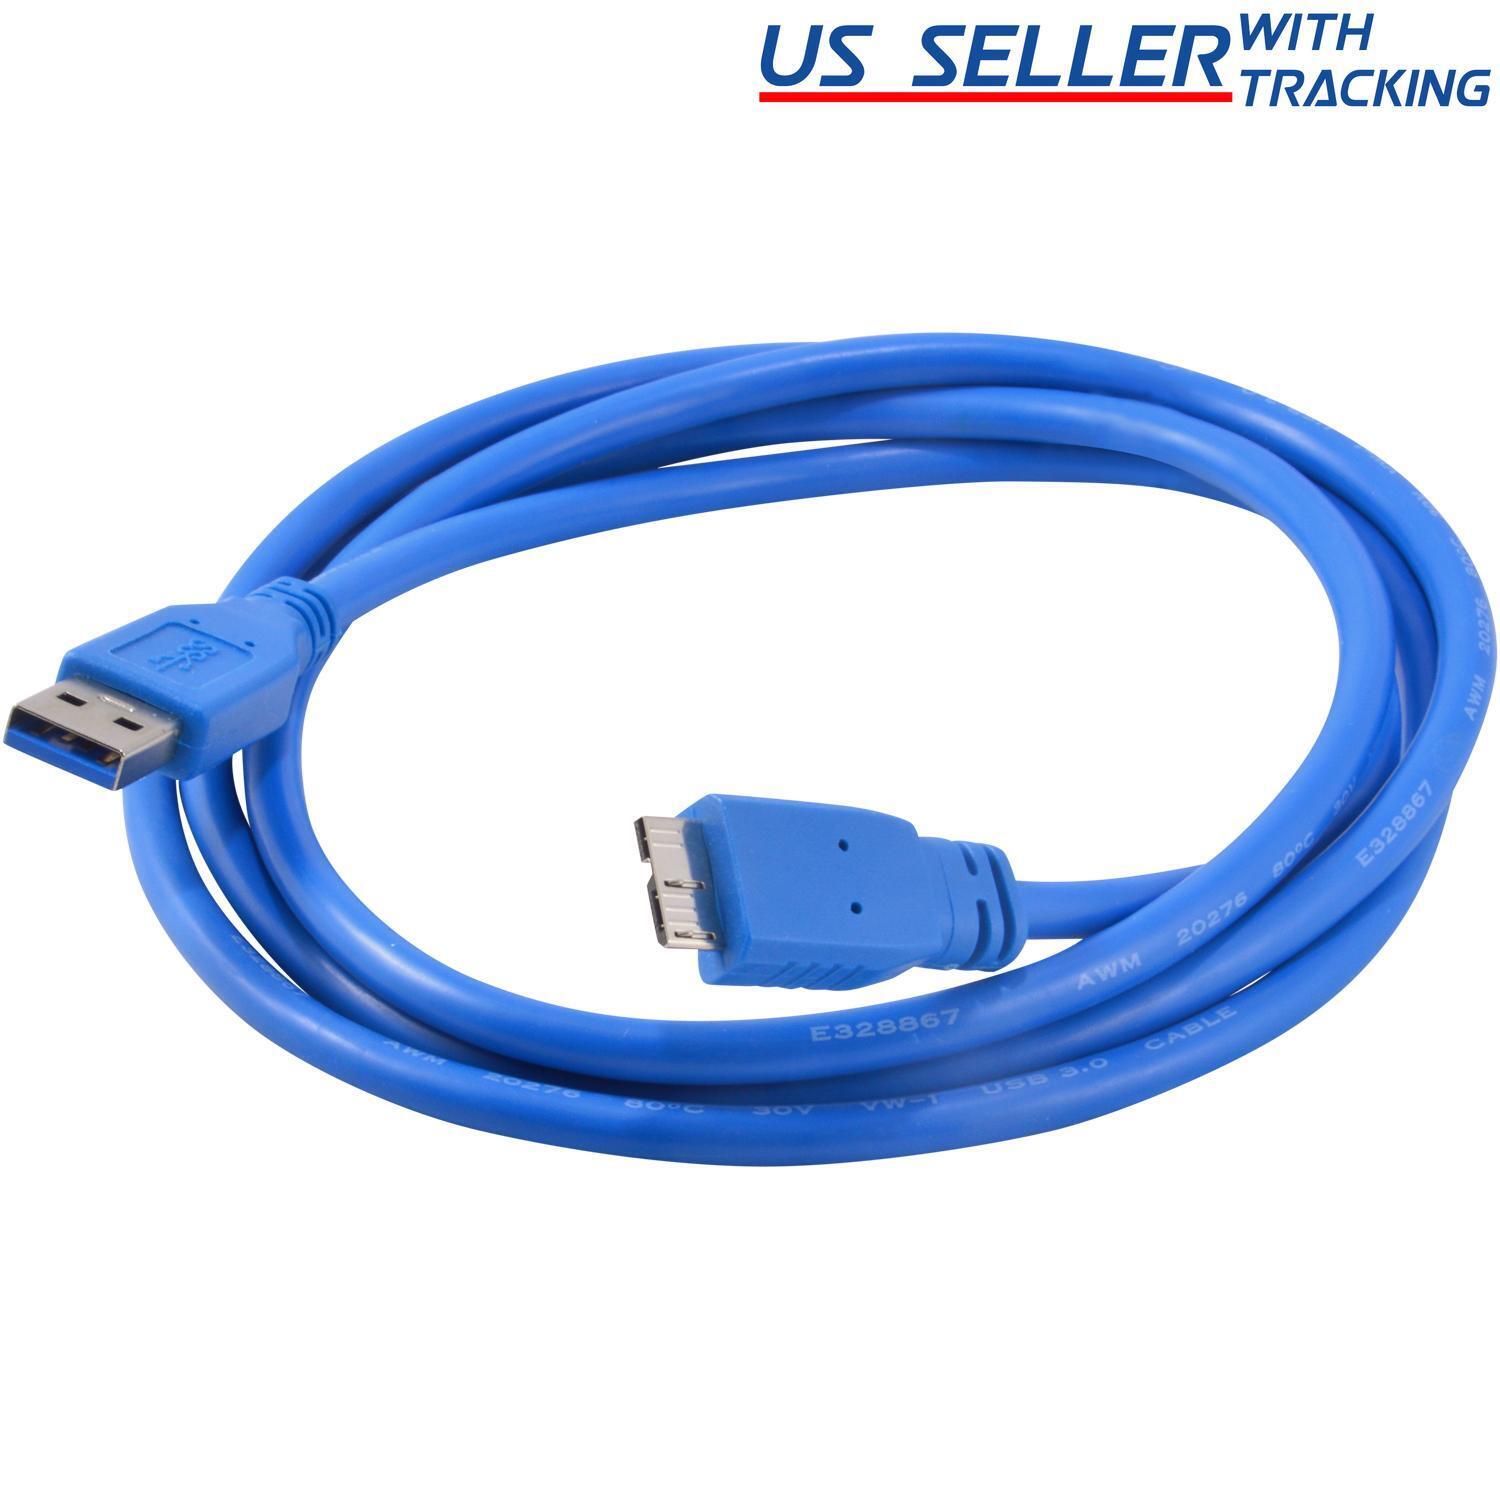 5FT Micro USB 3.0 Cable for Western Digital WD My Passport External Hard Drive